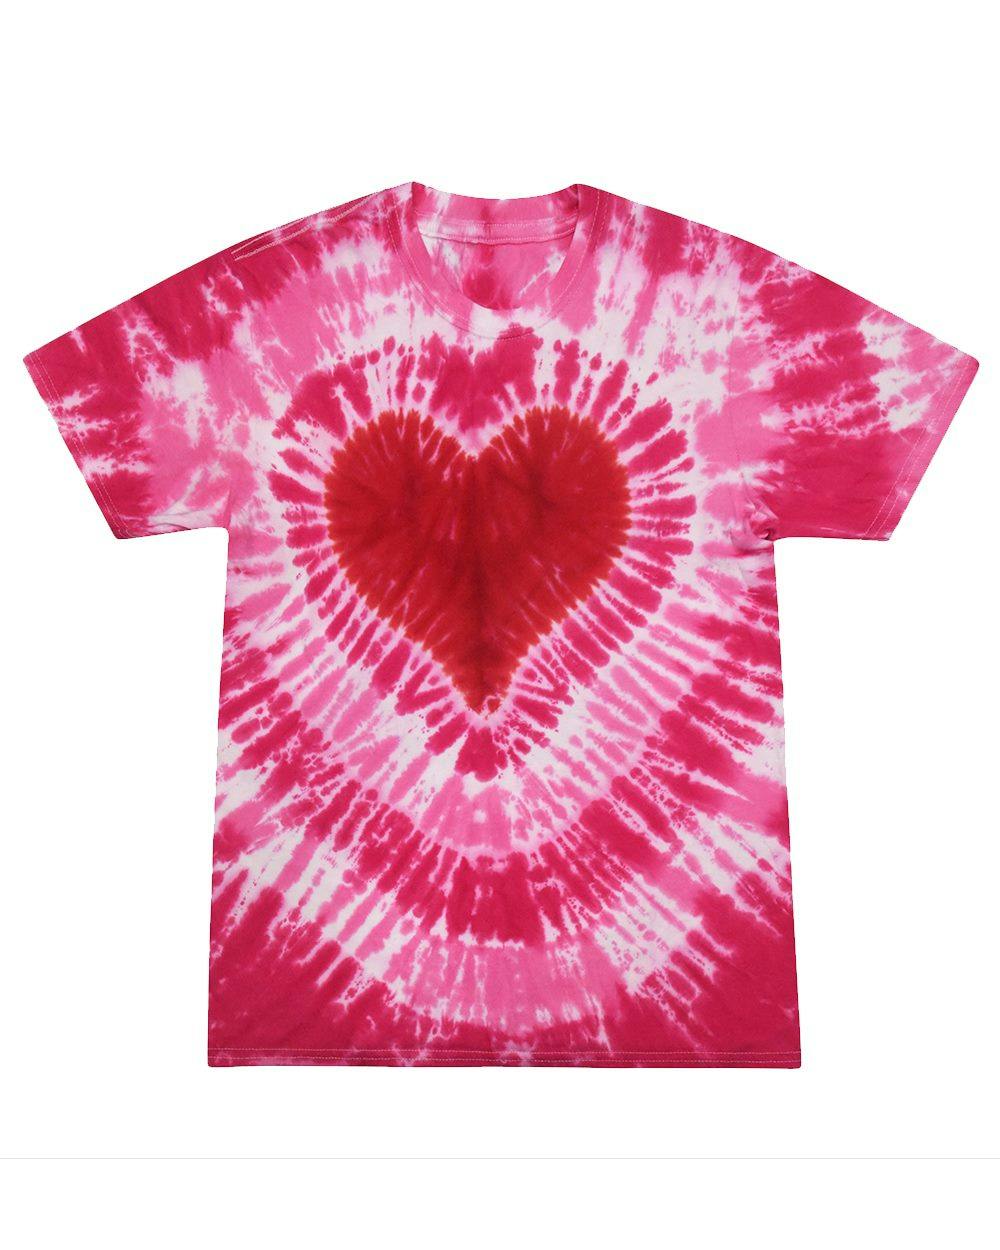 Image for Shapes Tie-Dyed T-Shirt - 1150